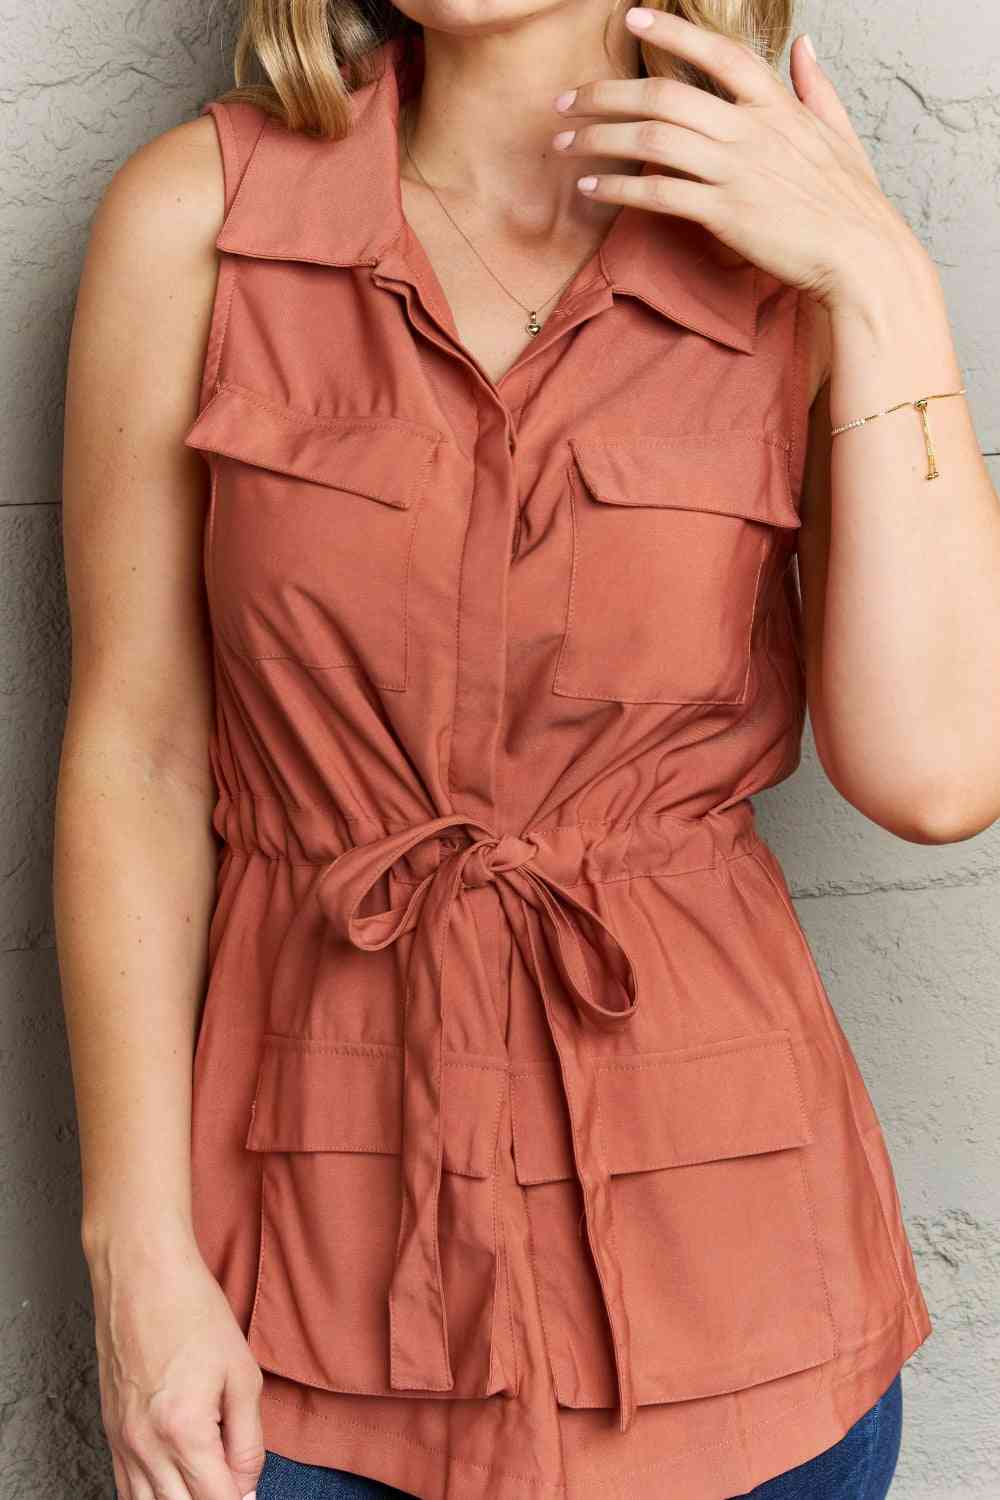 Light Sleeveless Collared Button Down Top - BRICK RED